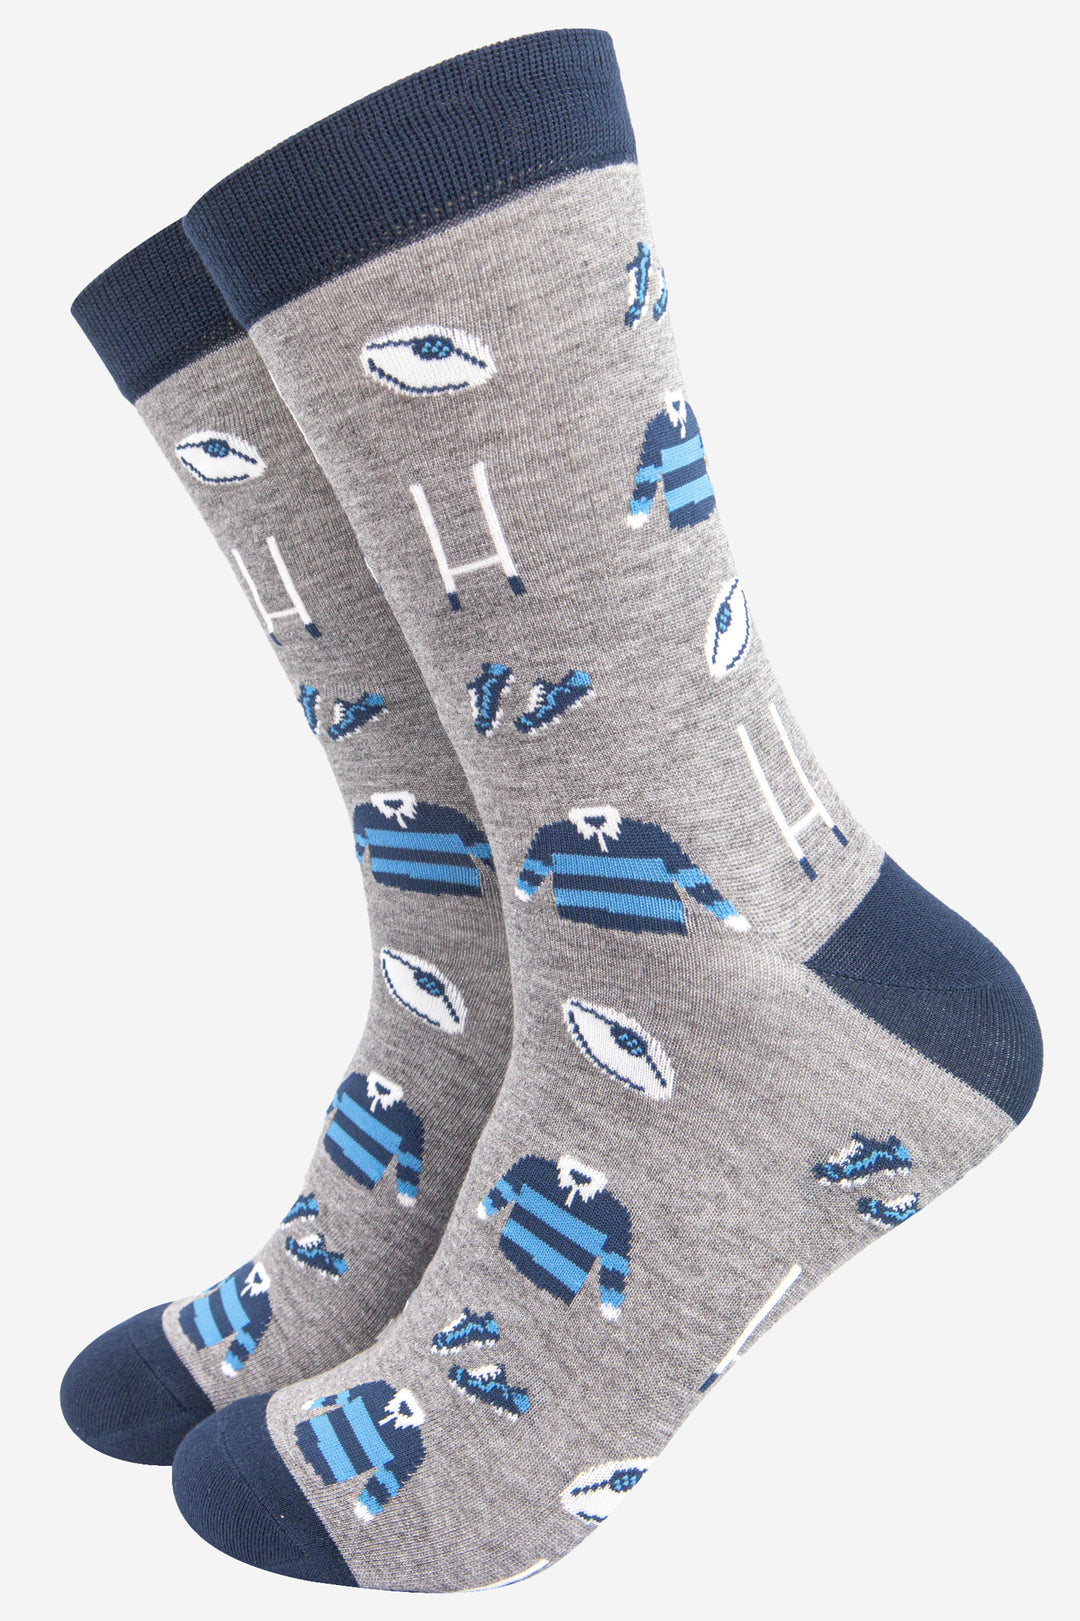 grey and blue dress socks featuring a blue rugby team kit, rugby ball and rugby goal posts